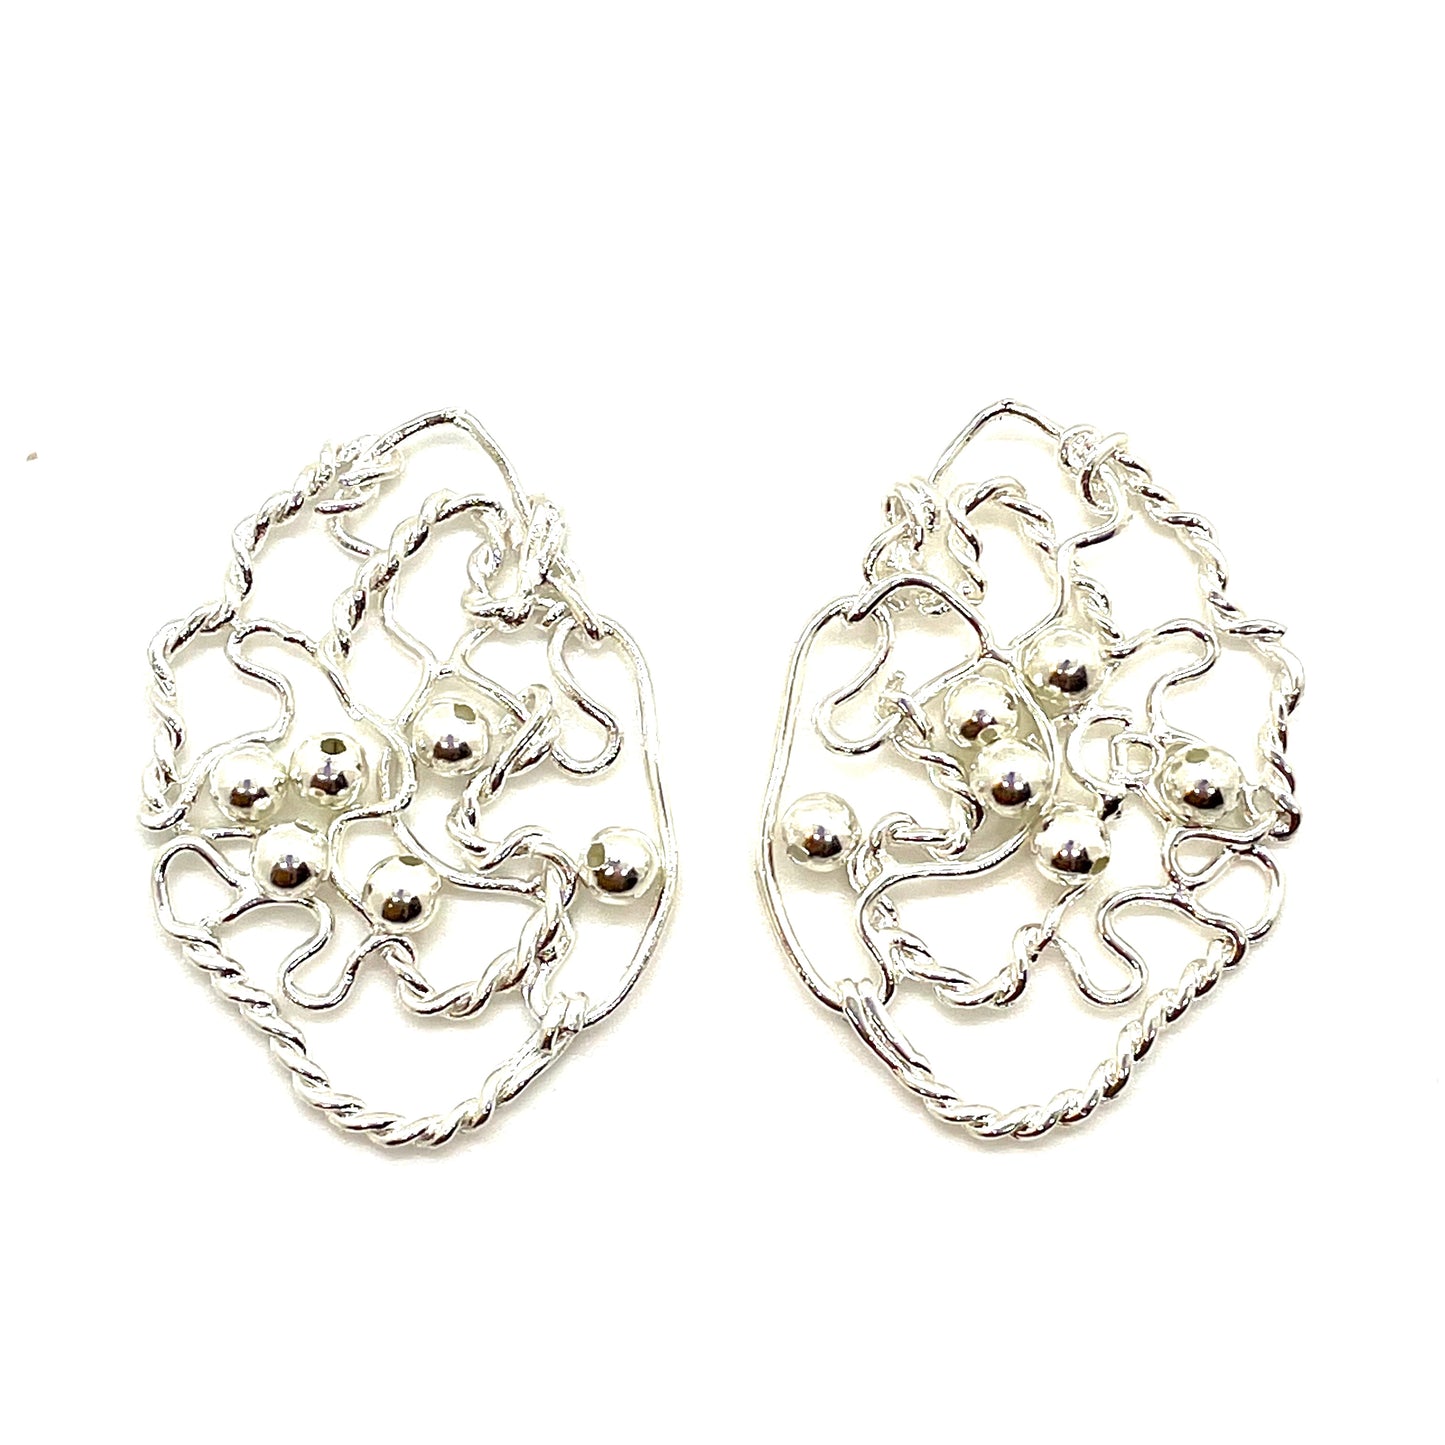 Silver MUSE clip-on earrings